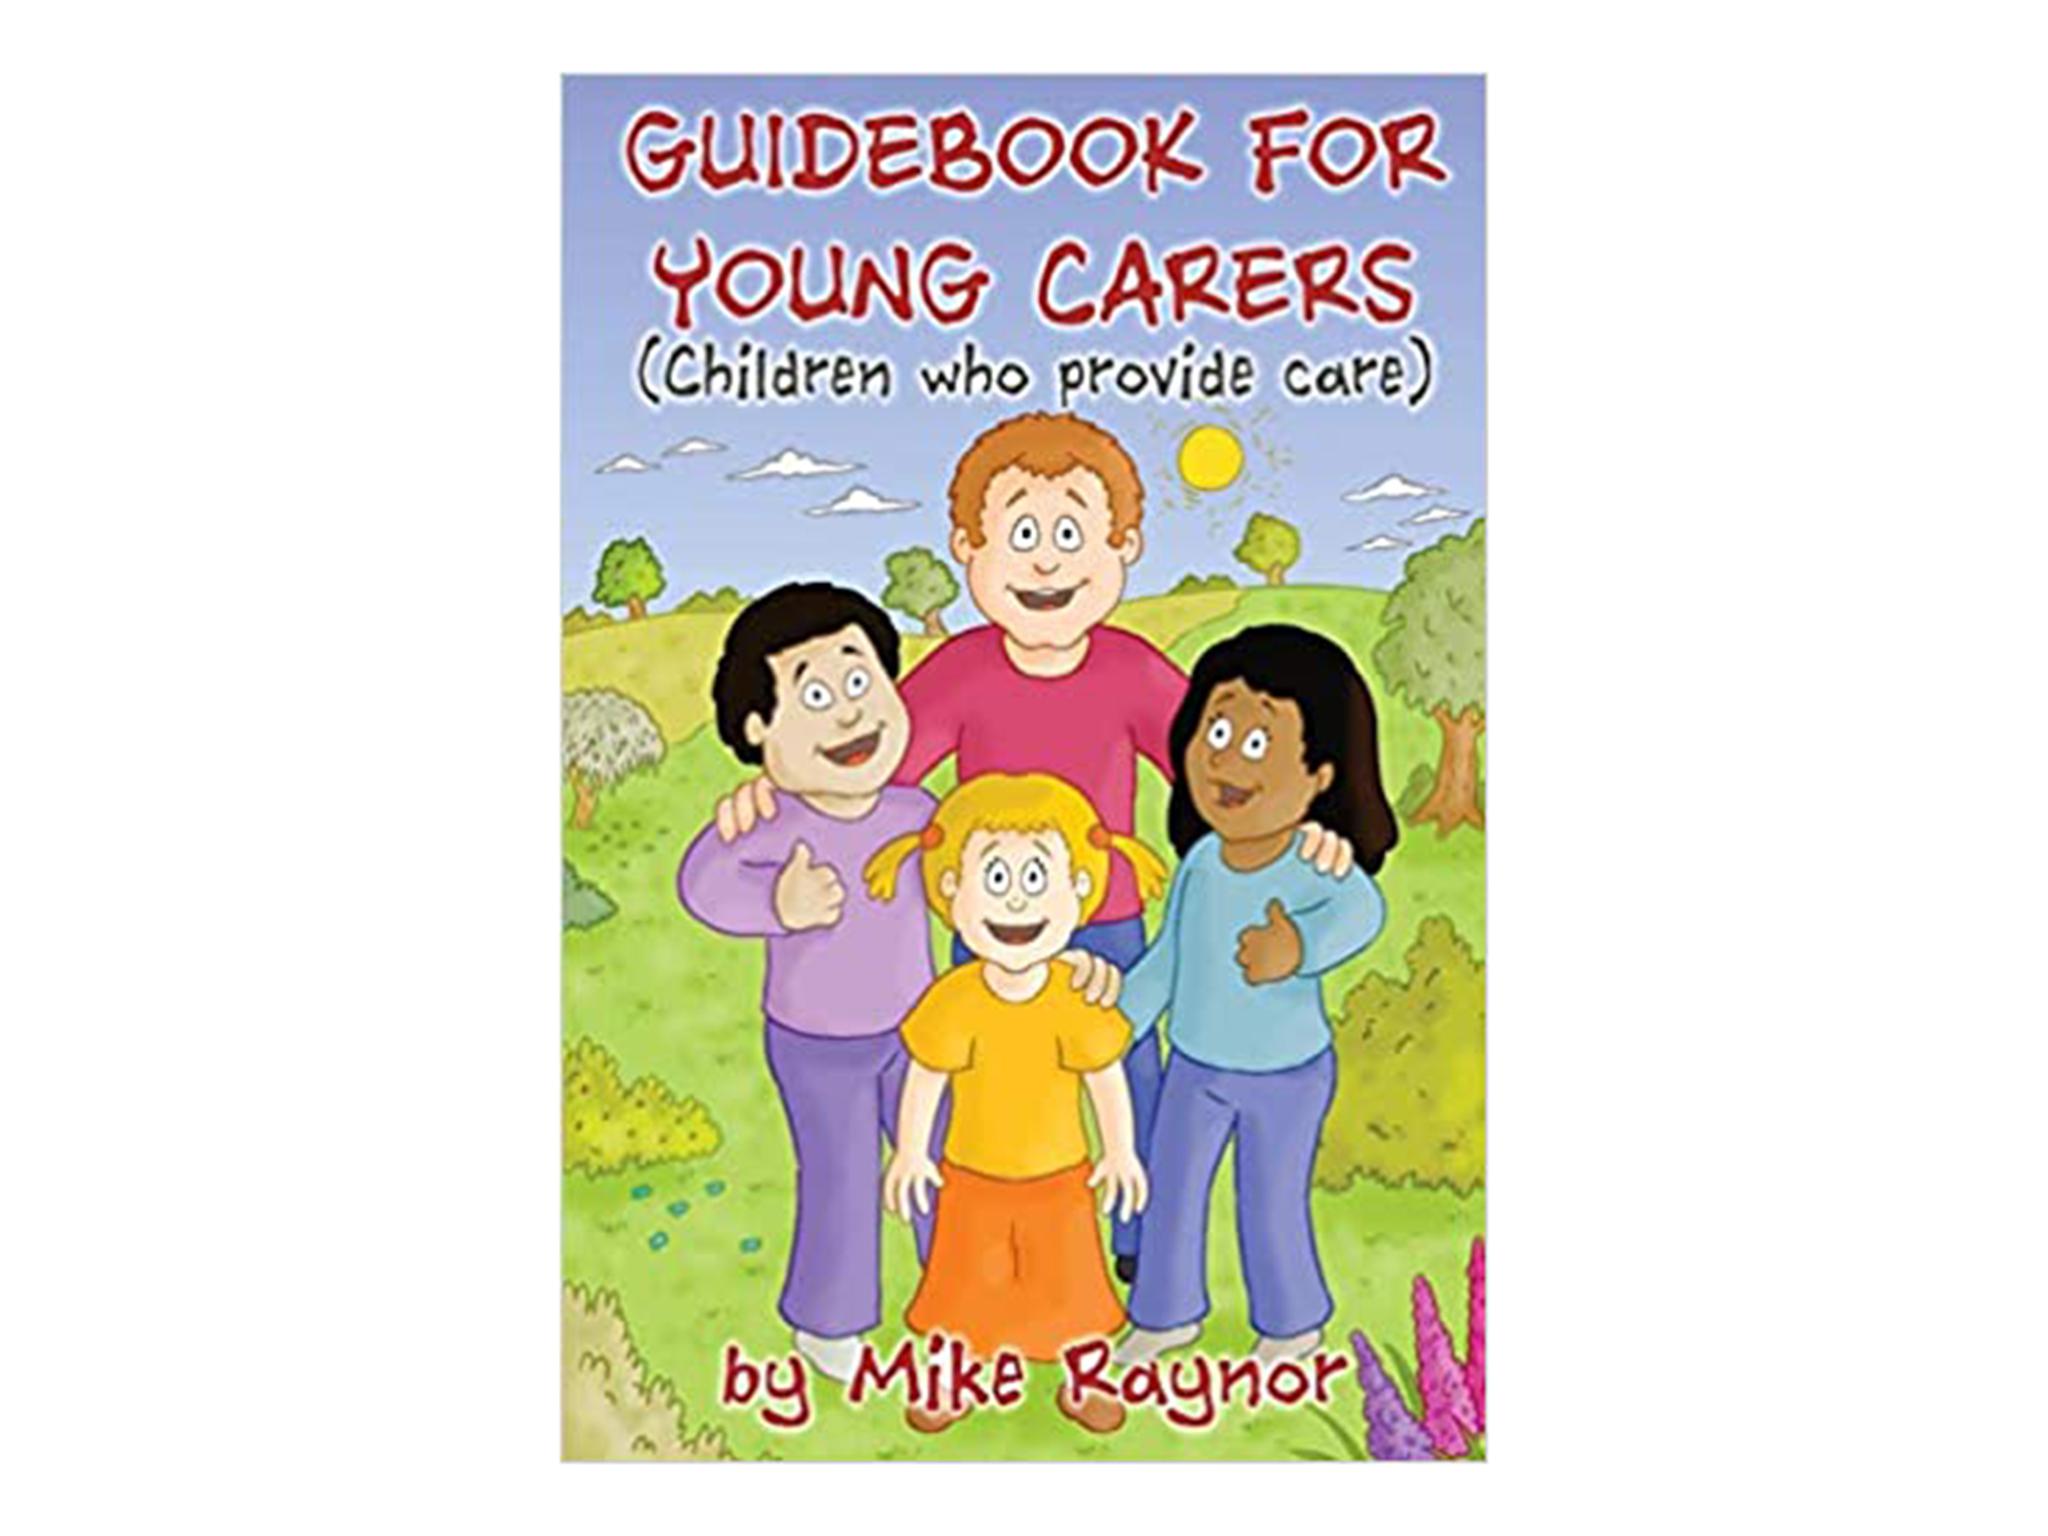 guidebook-for-young-carers-best-books-young-carers-indybest.jpg